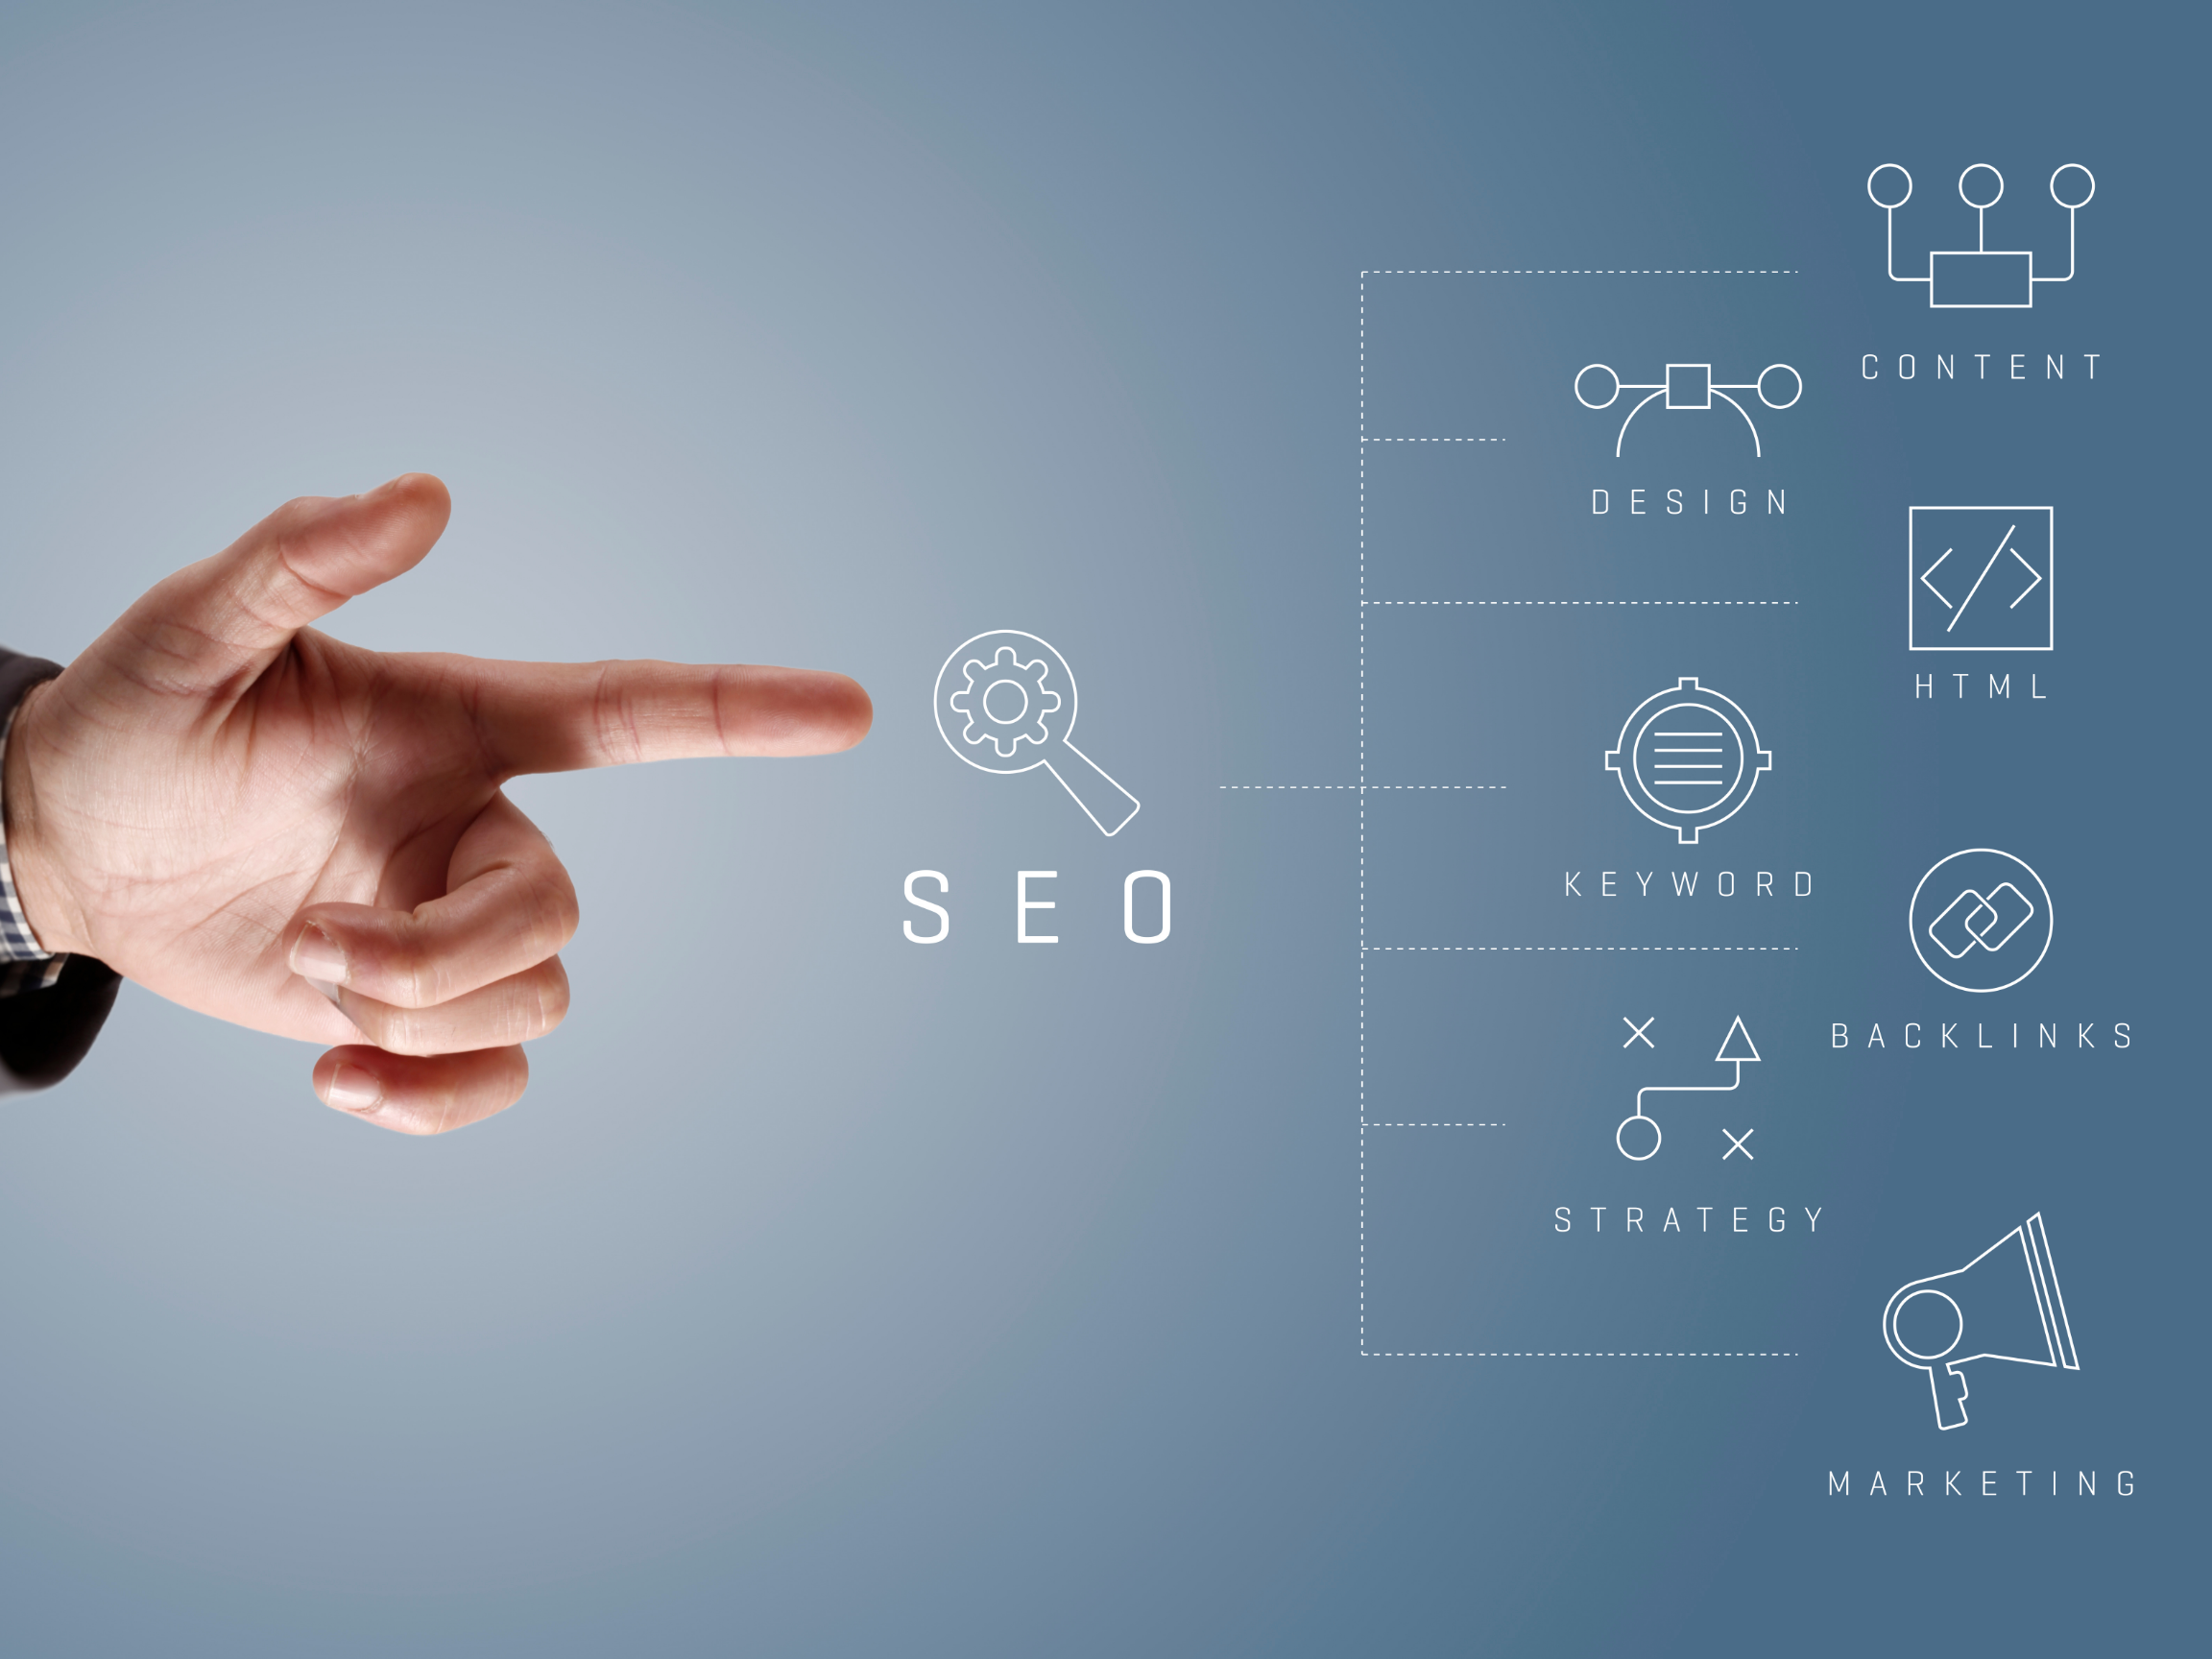 Finger pointed towards the SEO components